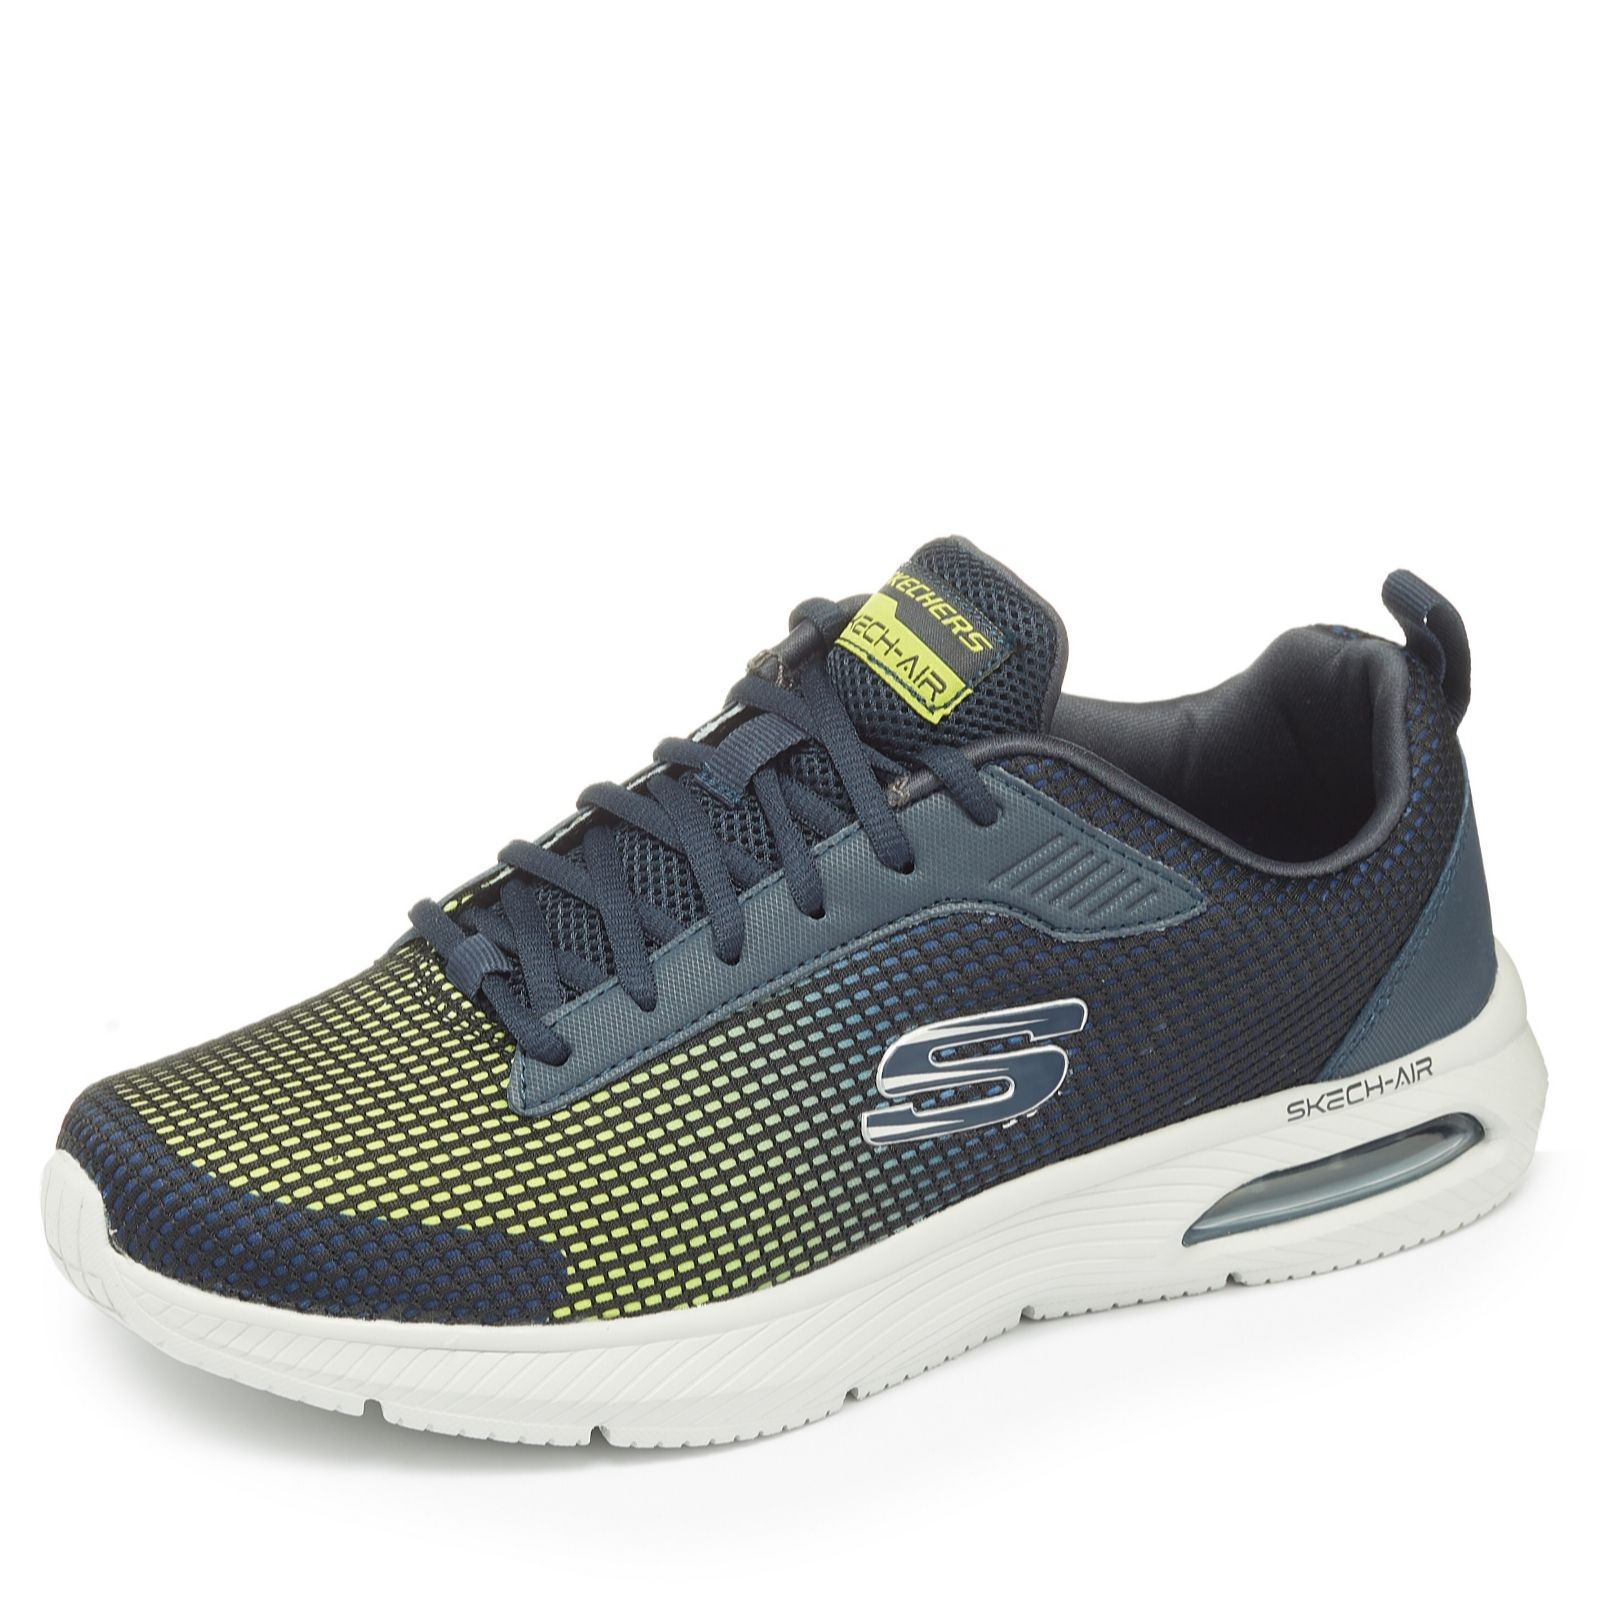 Skechers Men's Dyna Air Blyce Mesh Lace 